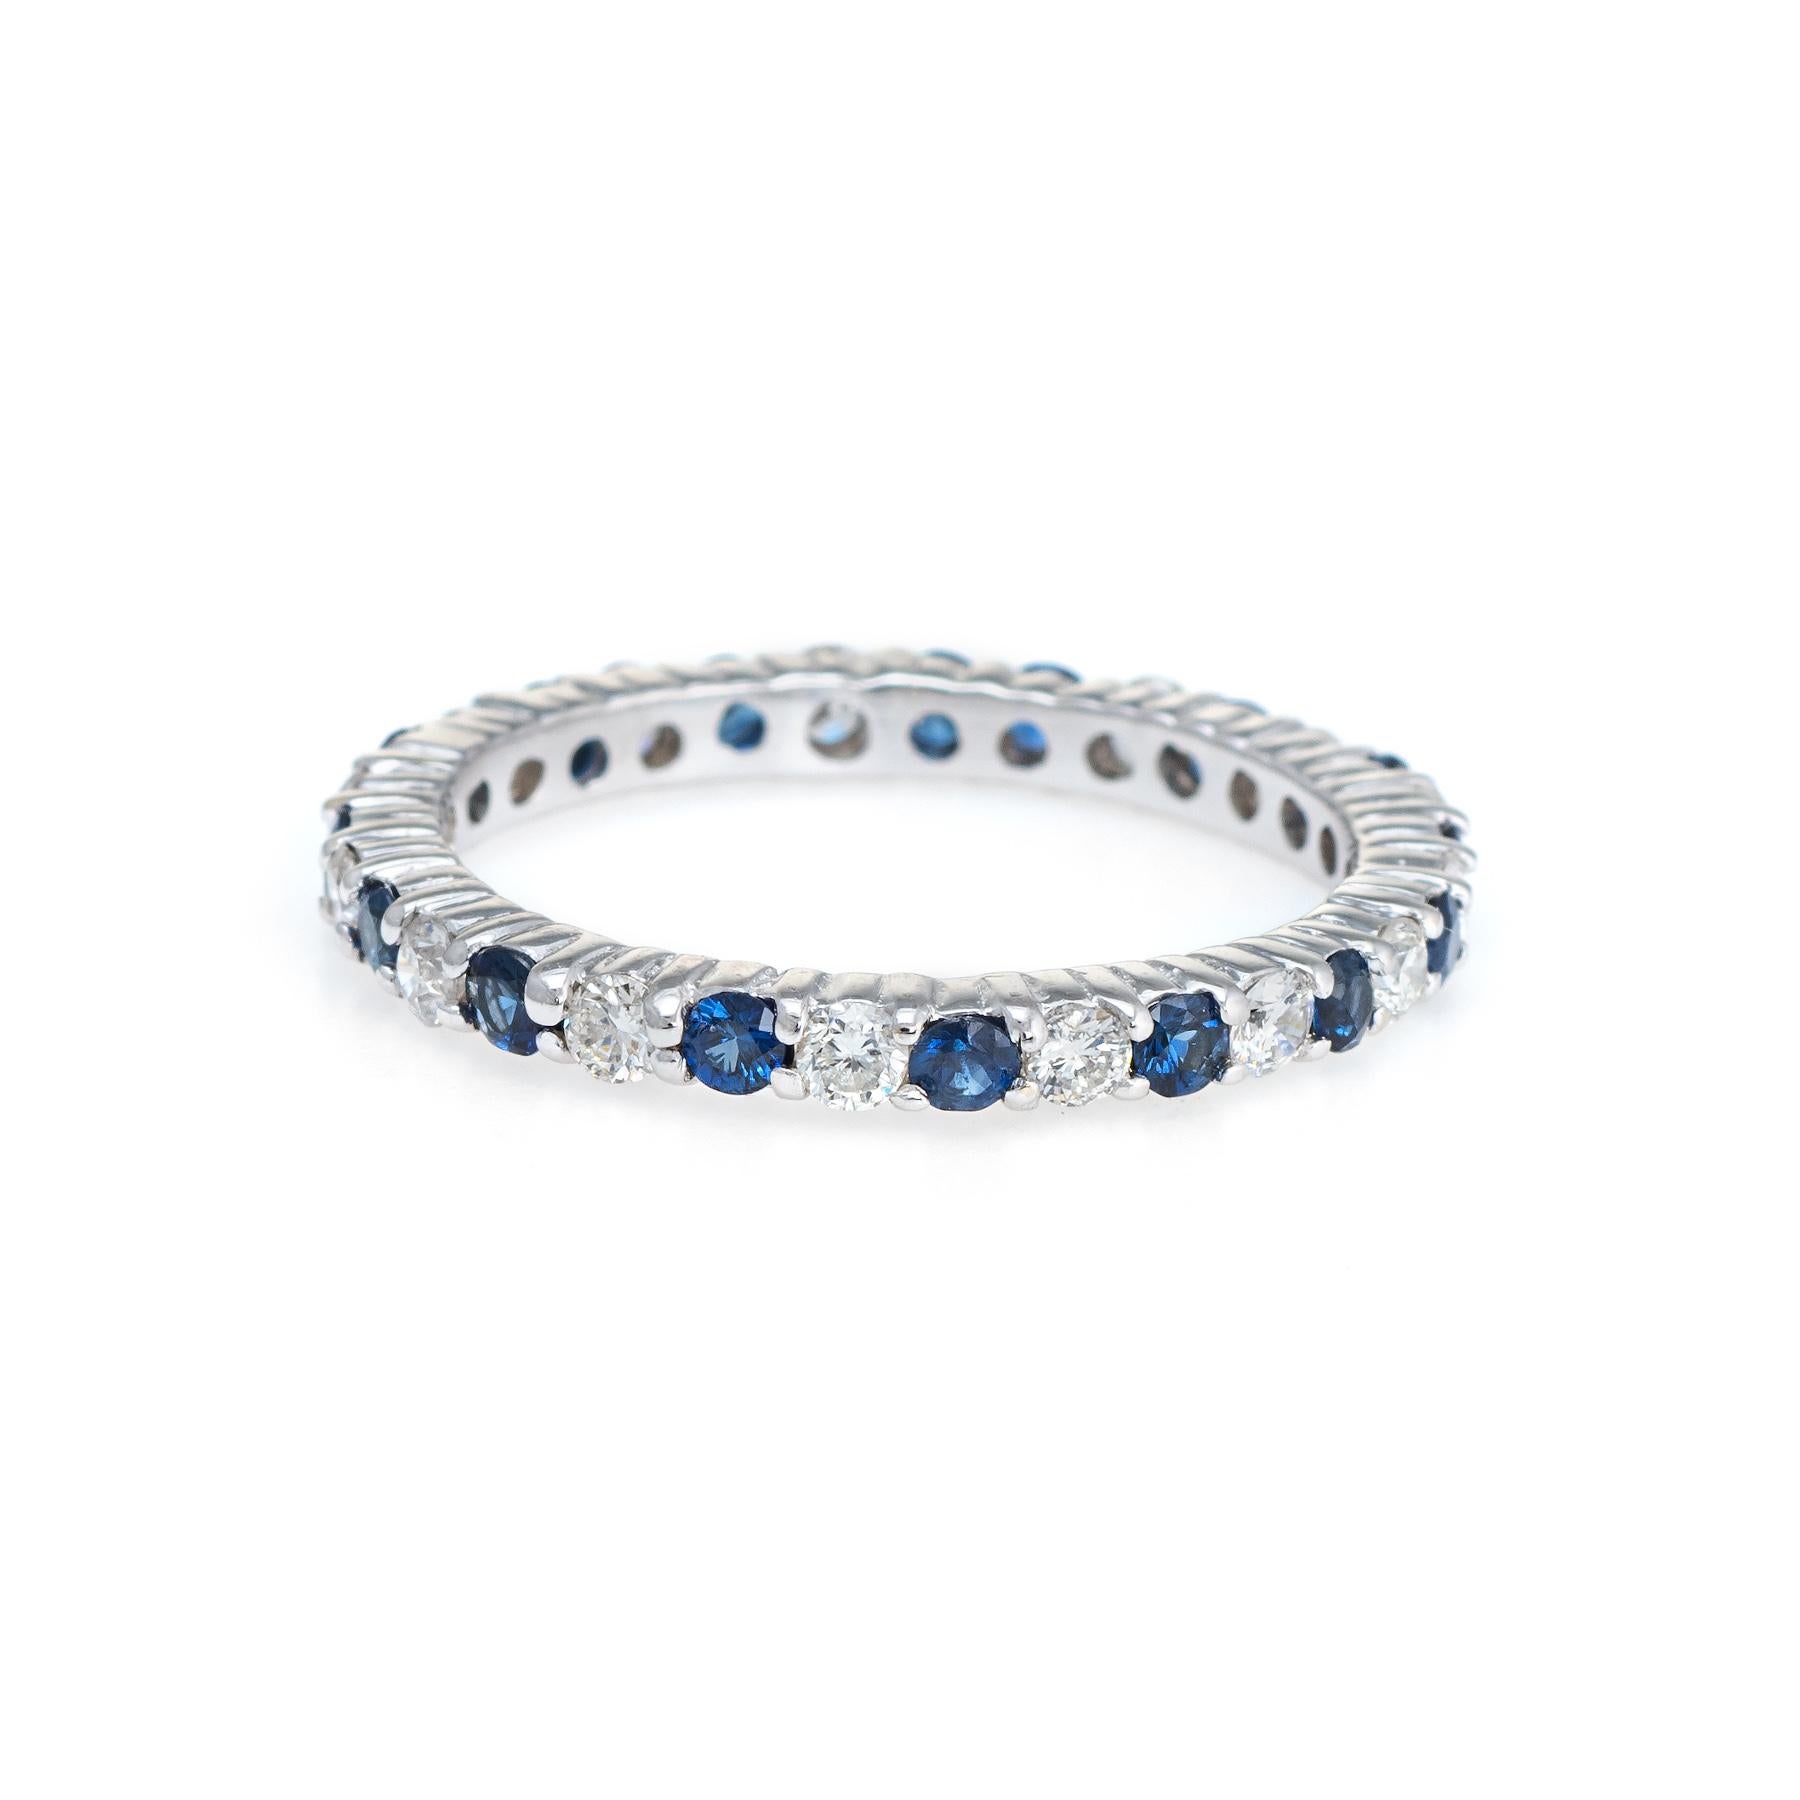 Finely detailed estate diamond & sapphire eternity ring, crafted in 14 karat white gold. 

15 round brilliant cut diamonds are estimated at 0.03 carats each and total an estimated 0.45 carats (estimated at H-I color and VS2-SI1 clarity. The 16 blue